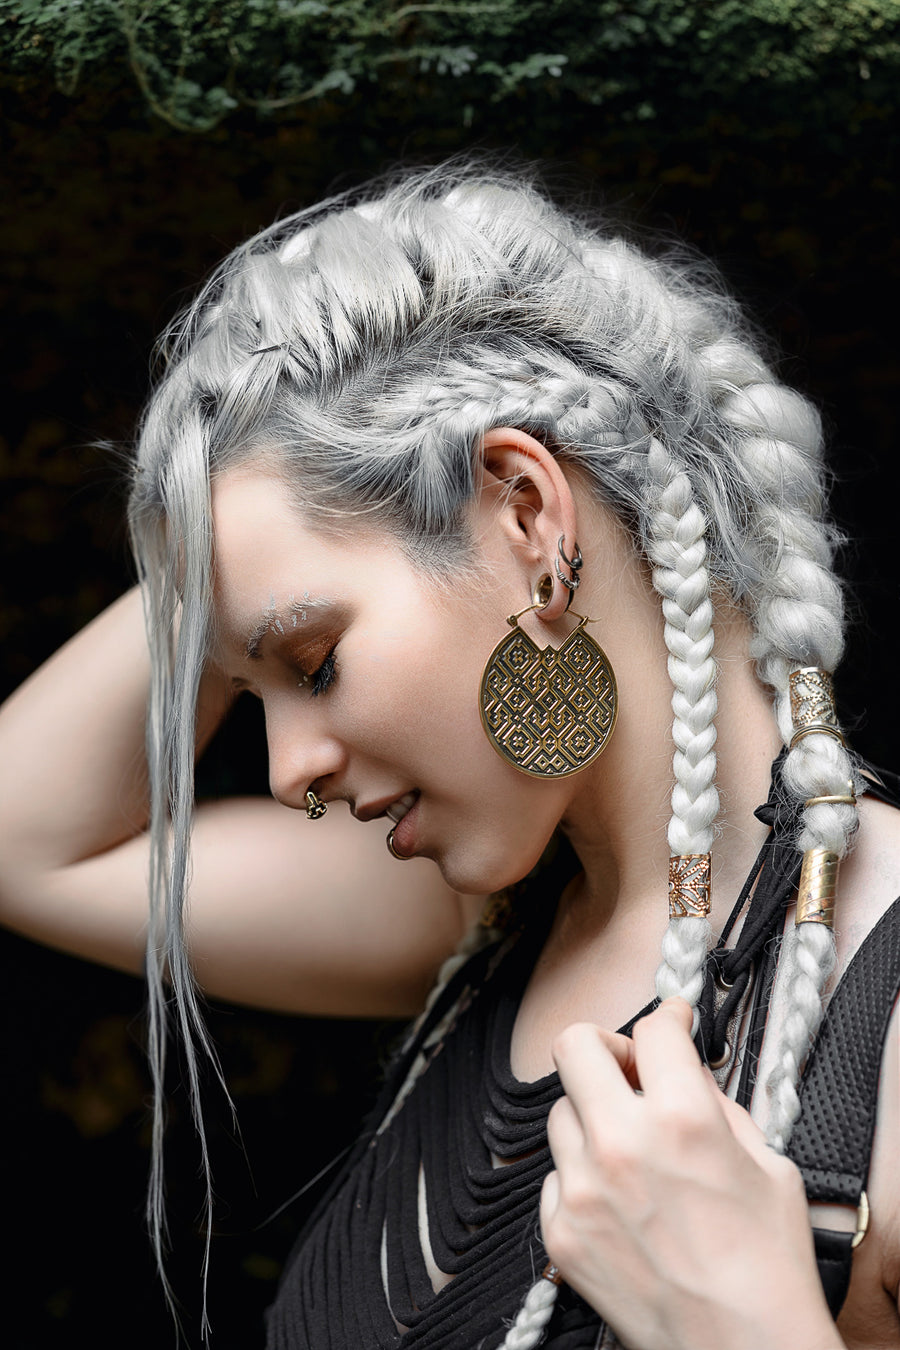 A profile view of a woman with silvery white hair styled in braids and loose strands, wearing ornate, disc-shaped earrings with a complex geometric pattern. She has a septum piercing and multiple ear piercings, subtly highlighted by her poised head tilt and gentle hand placement near her neck. The lighting casts a soft glow on her face, emphasizing her reflective expression